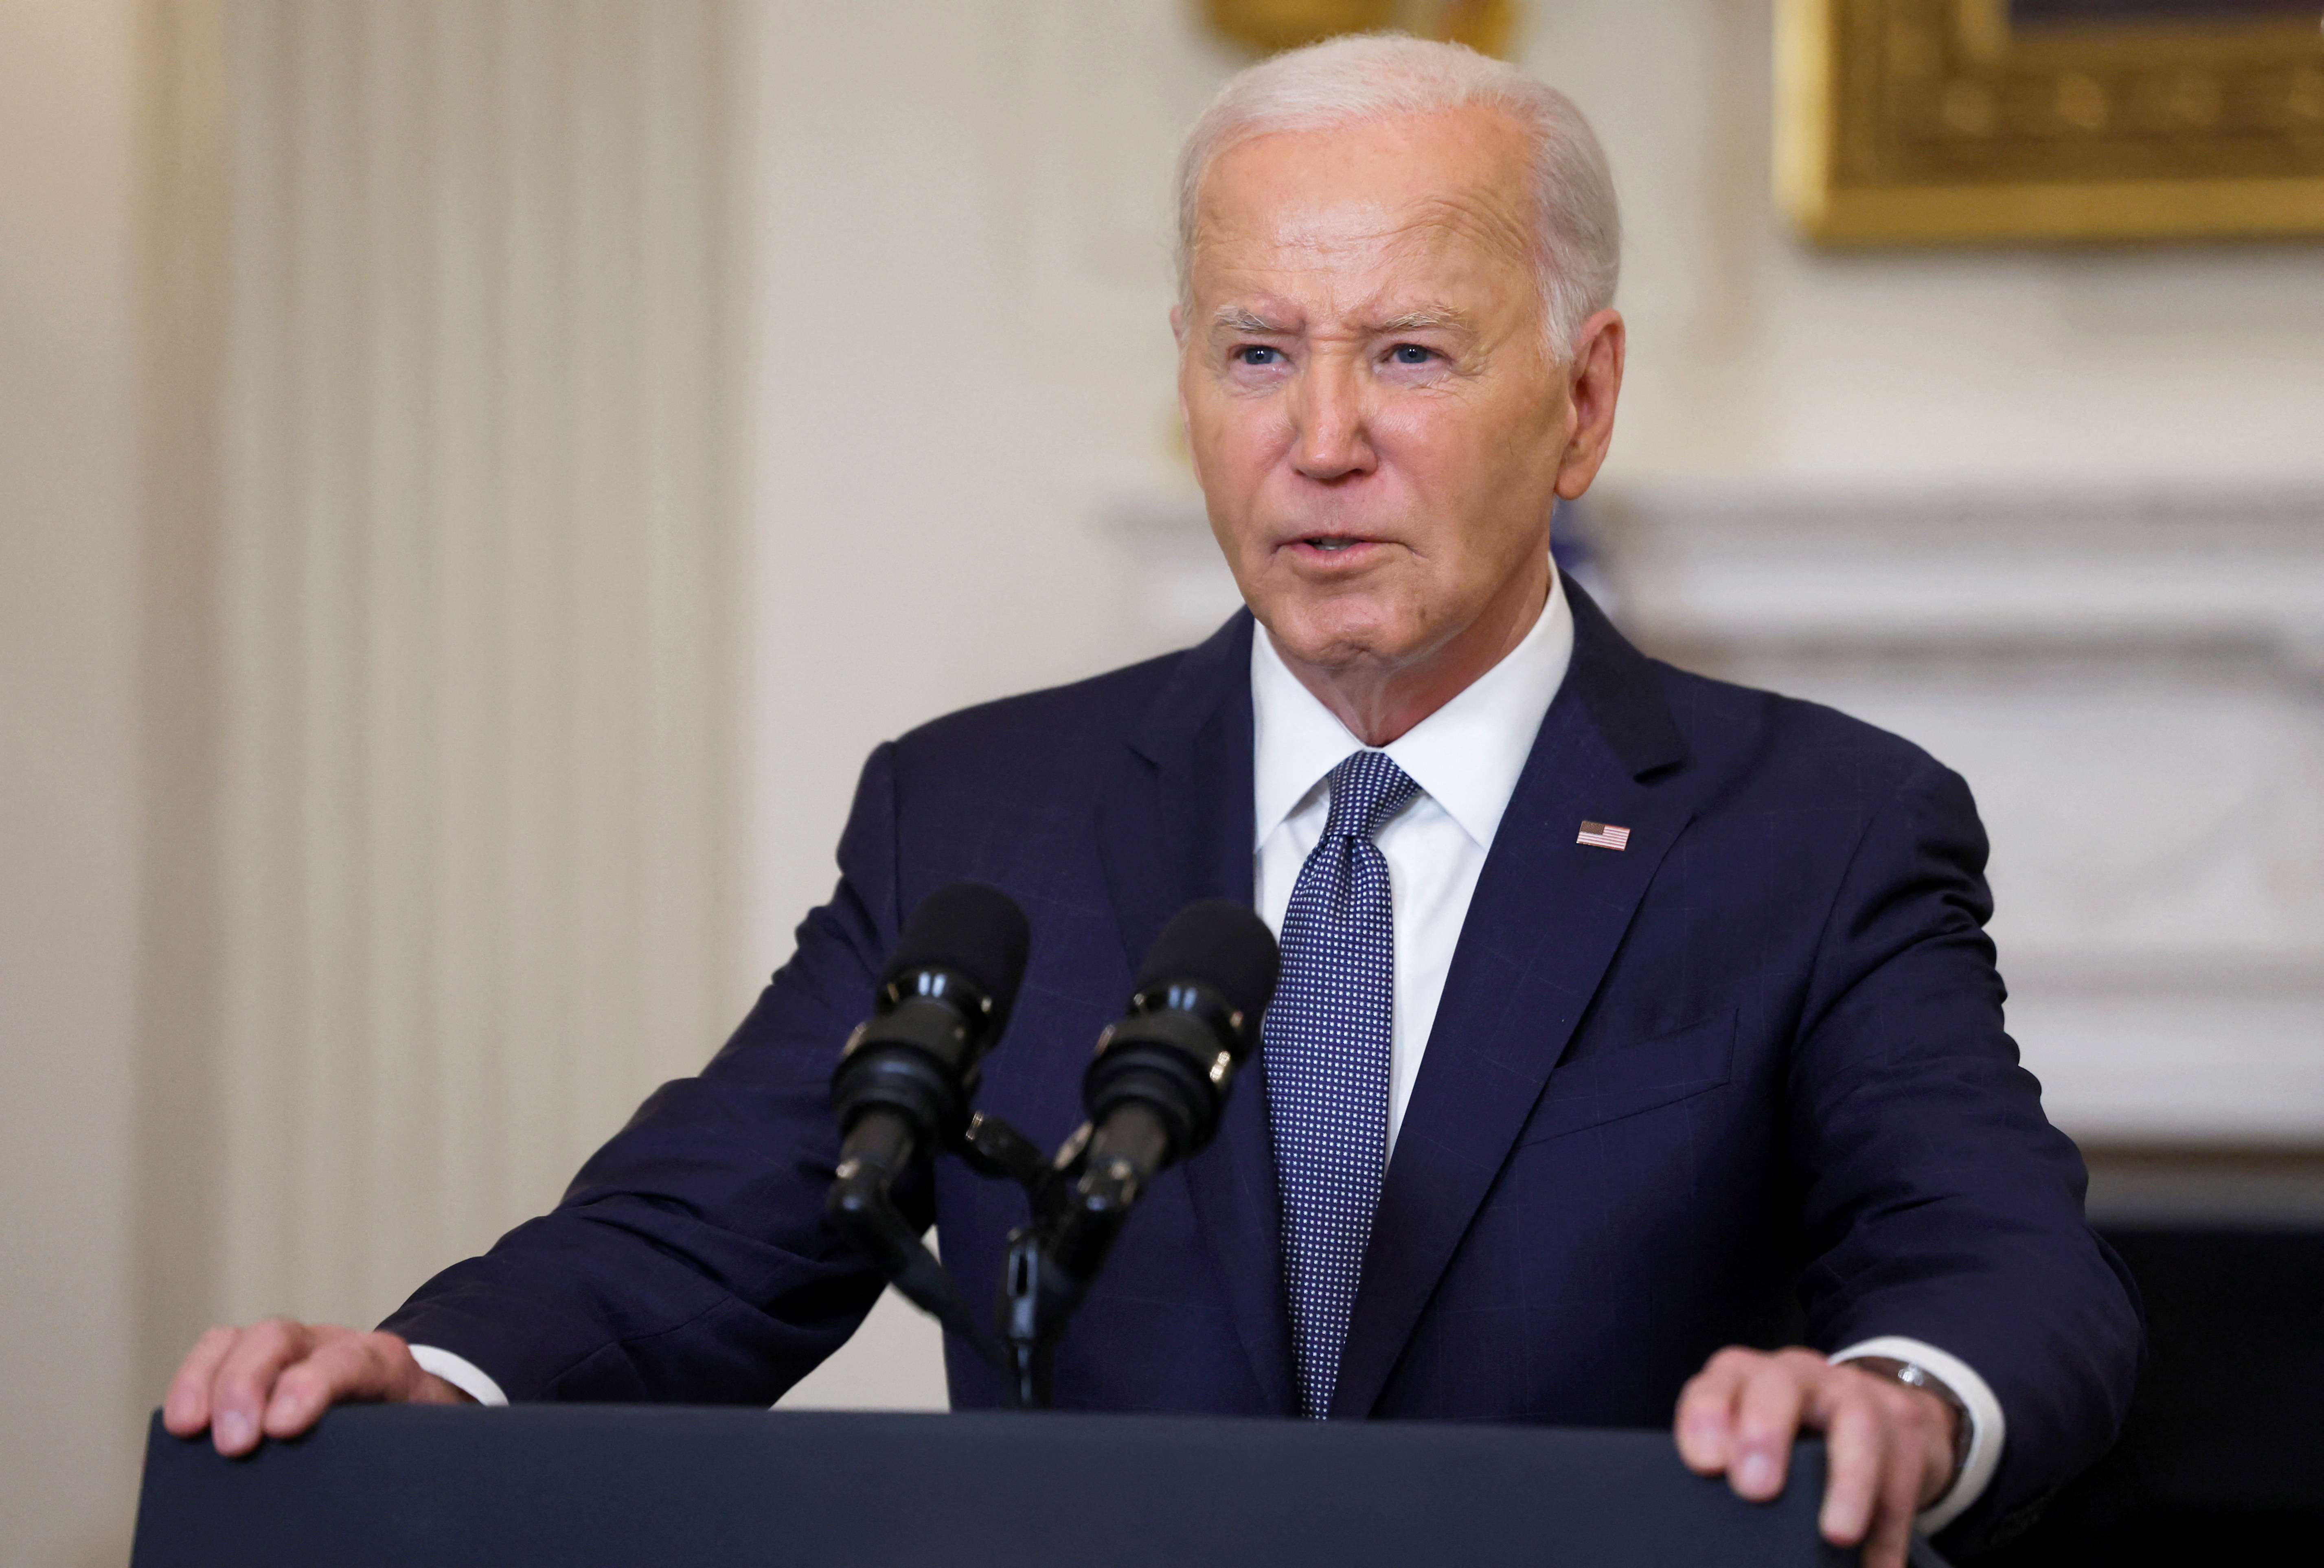 U.S. President Joe Biden delivers remarks on the Middle East at the White House in Washington